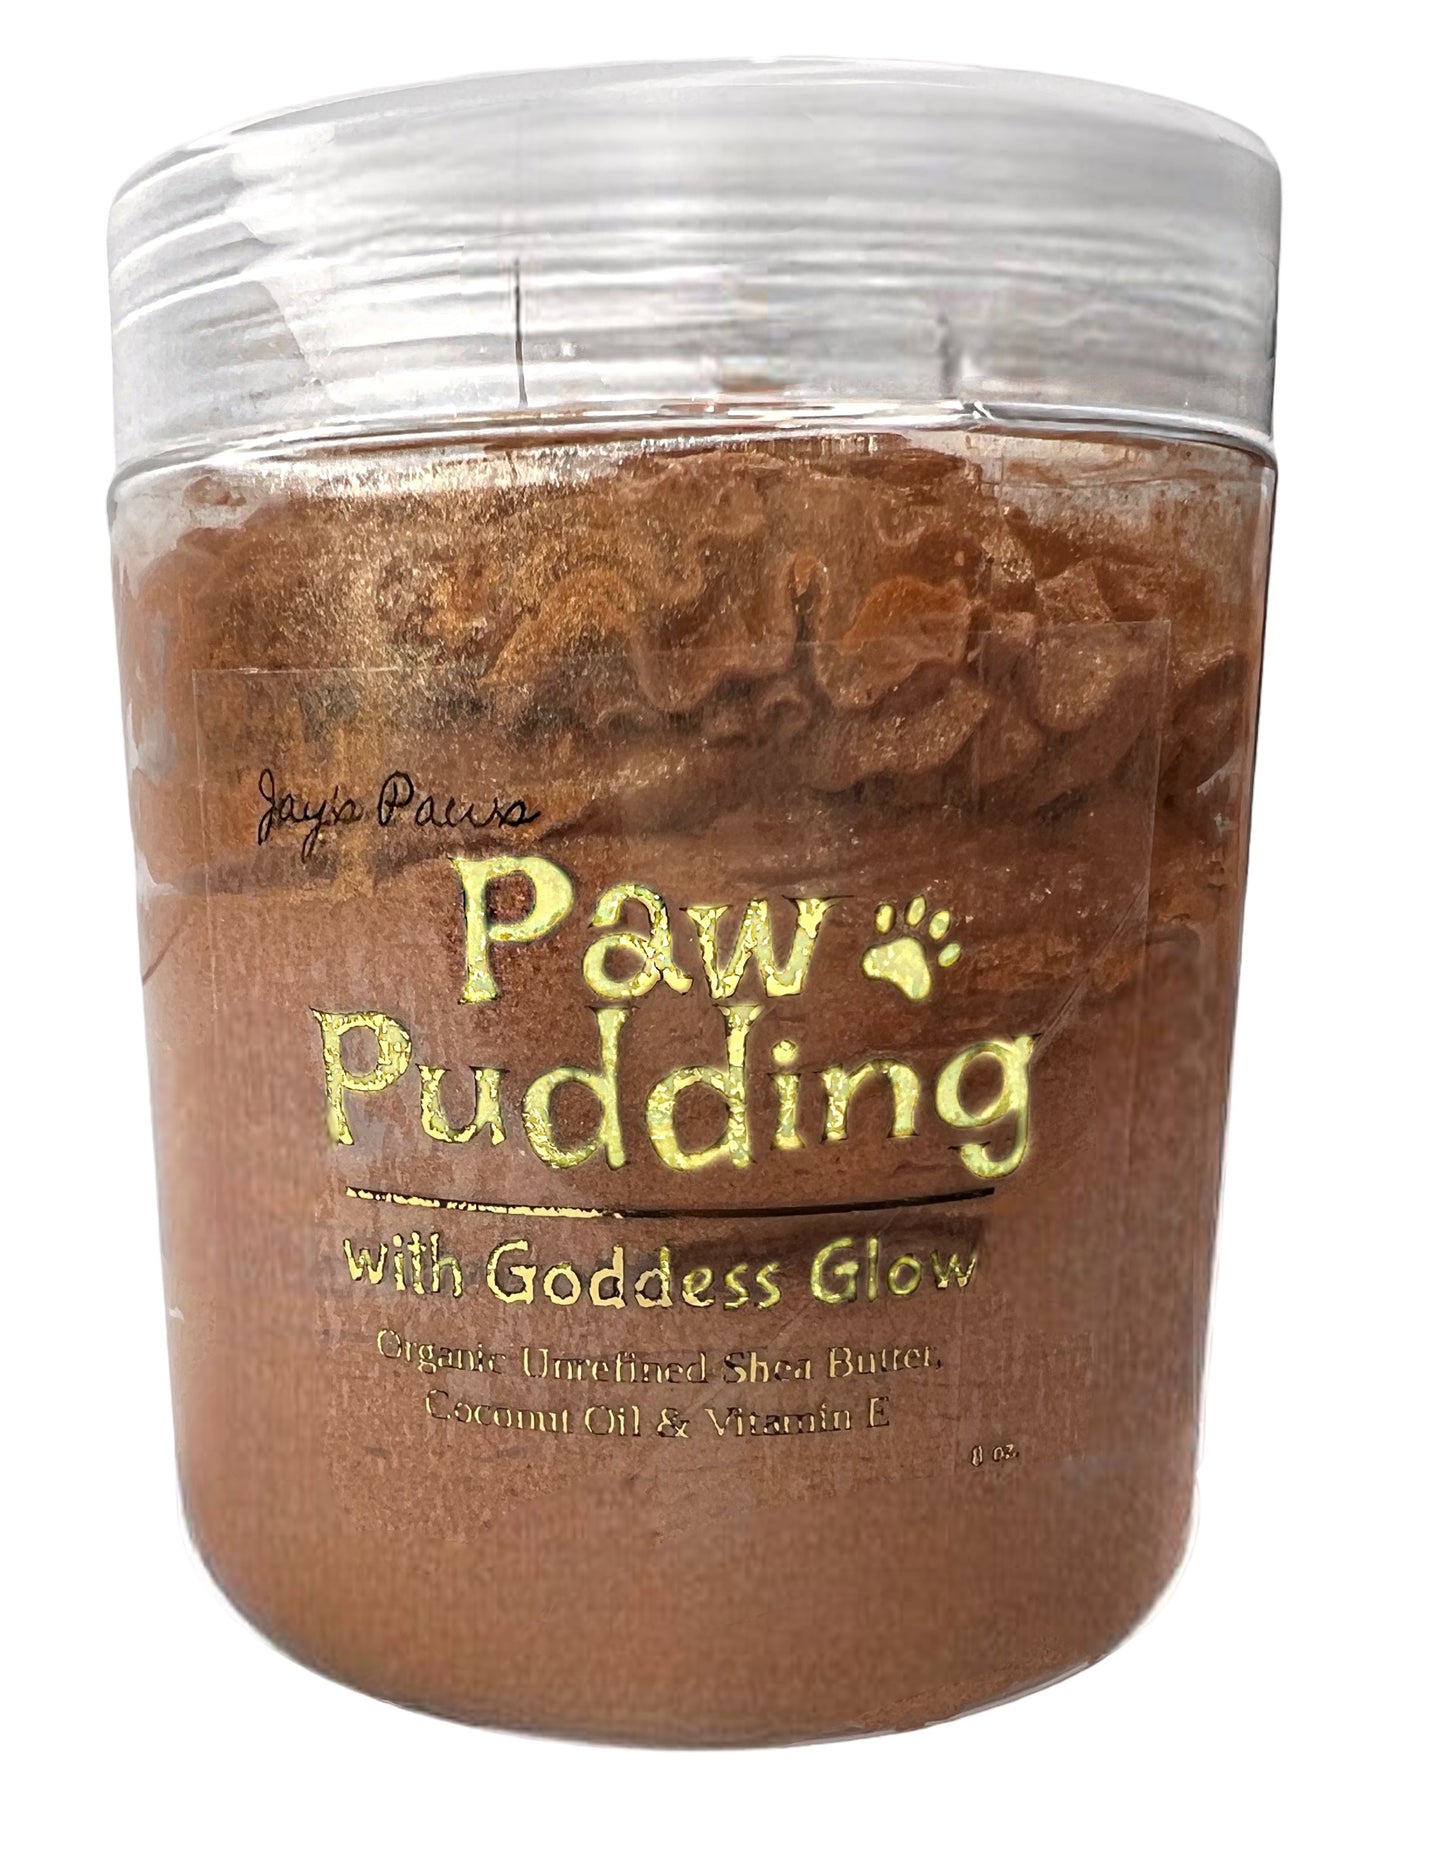 Shimmering Body Butter - Jay's Paw Pudding w/ Goddess Glow